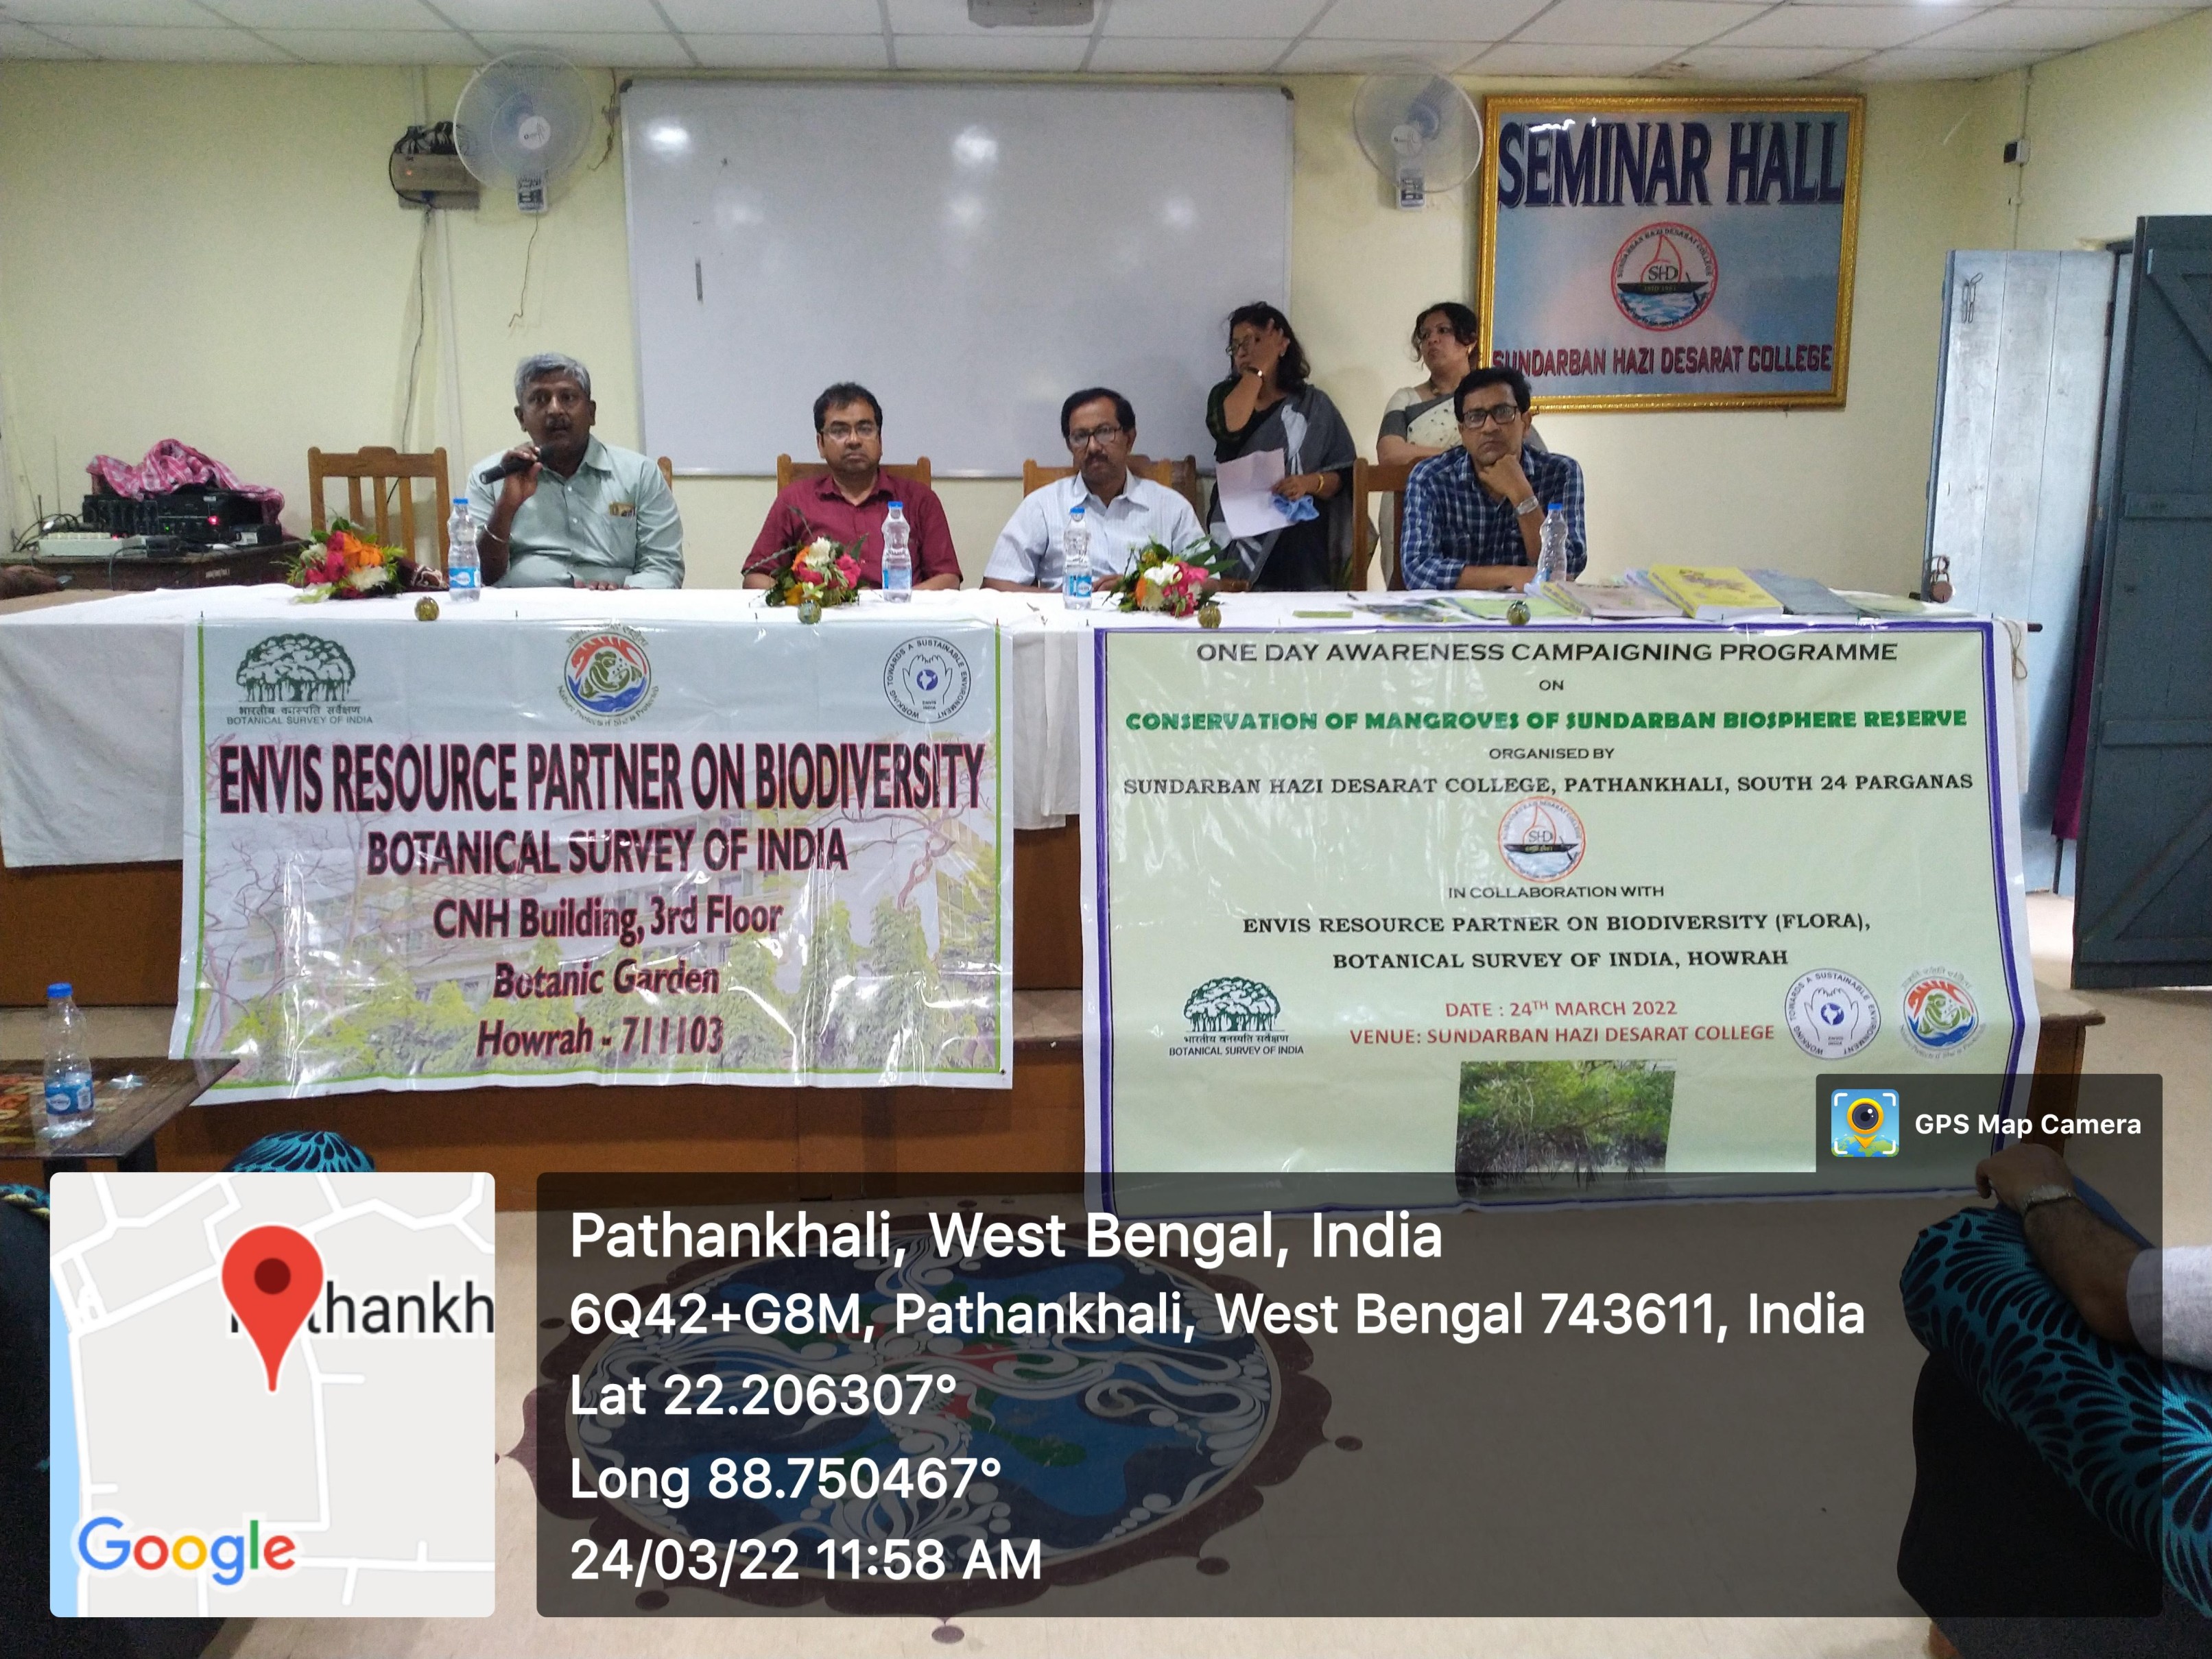 Seminar on Mangroves Conservation in collaboration with BSI